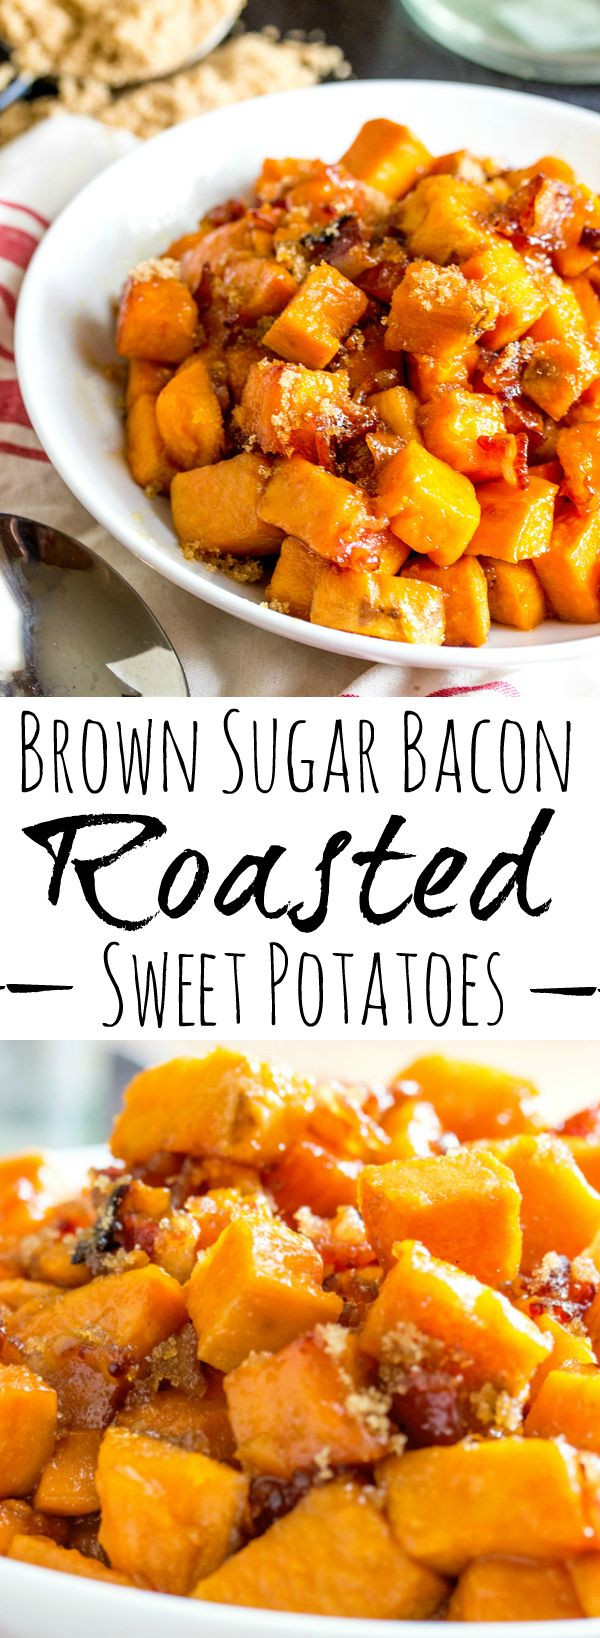 Sweet Potatoes Recipe For Thanksgiving Dinner
 Brown Sugar Bacon Roasted Sweet Potatoes